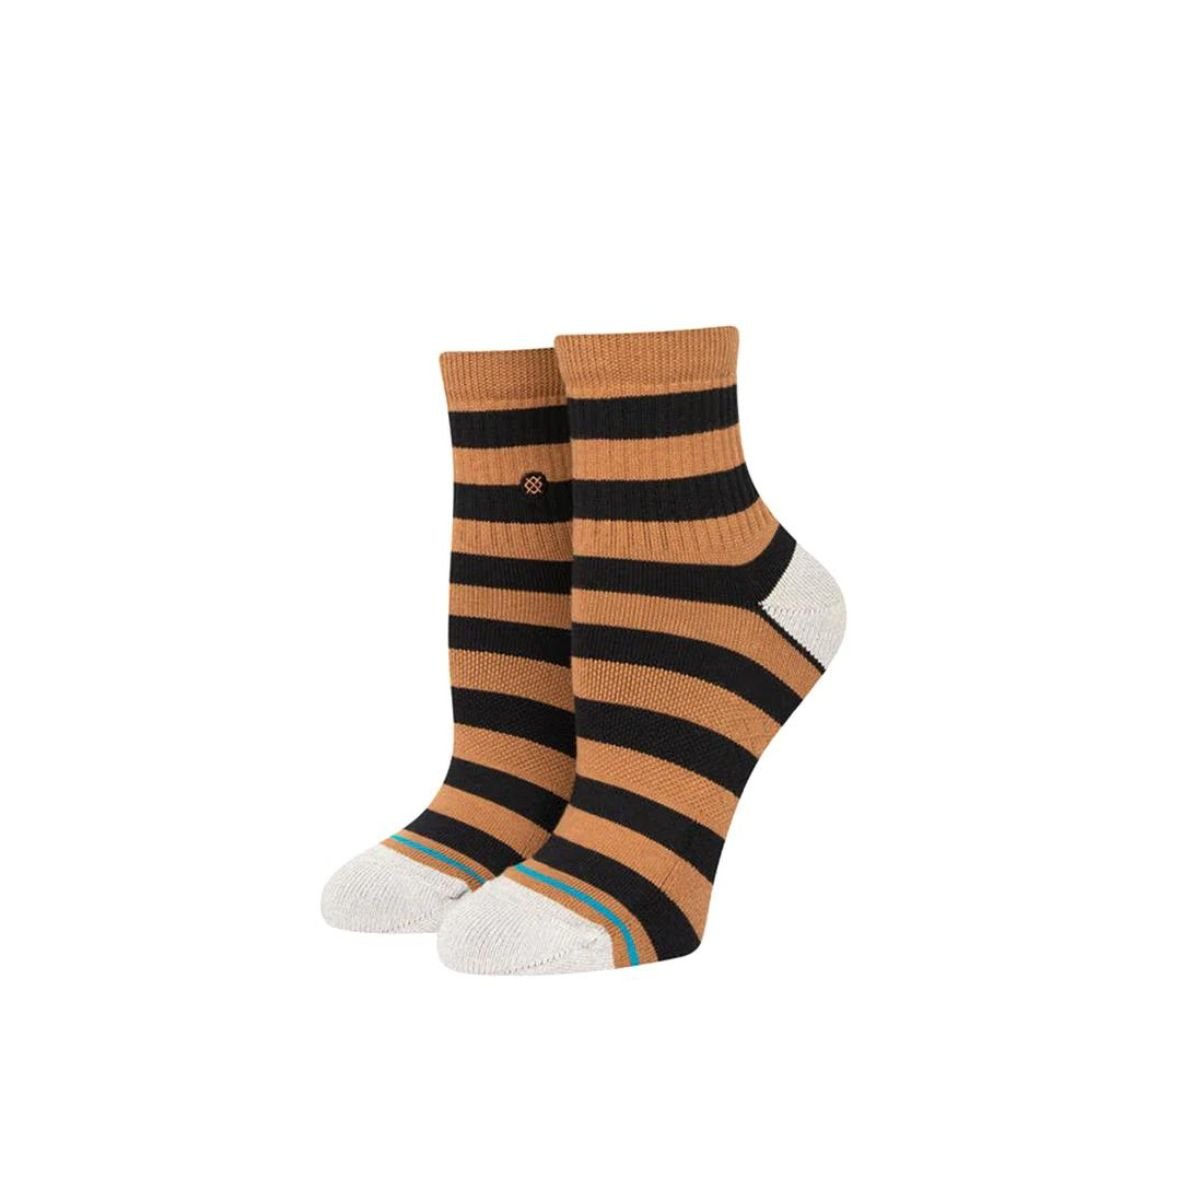 Stance Anything QTR Socks in Black/Brown - BoardCo